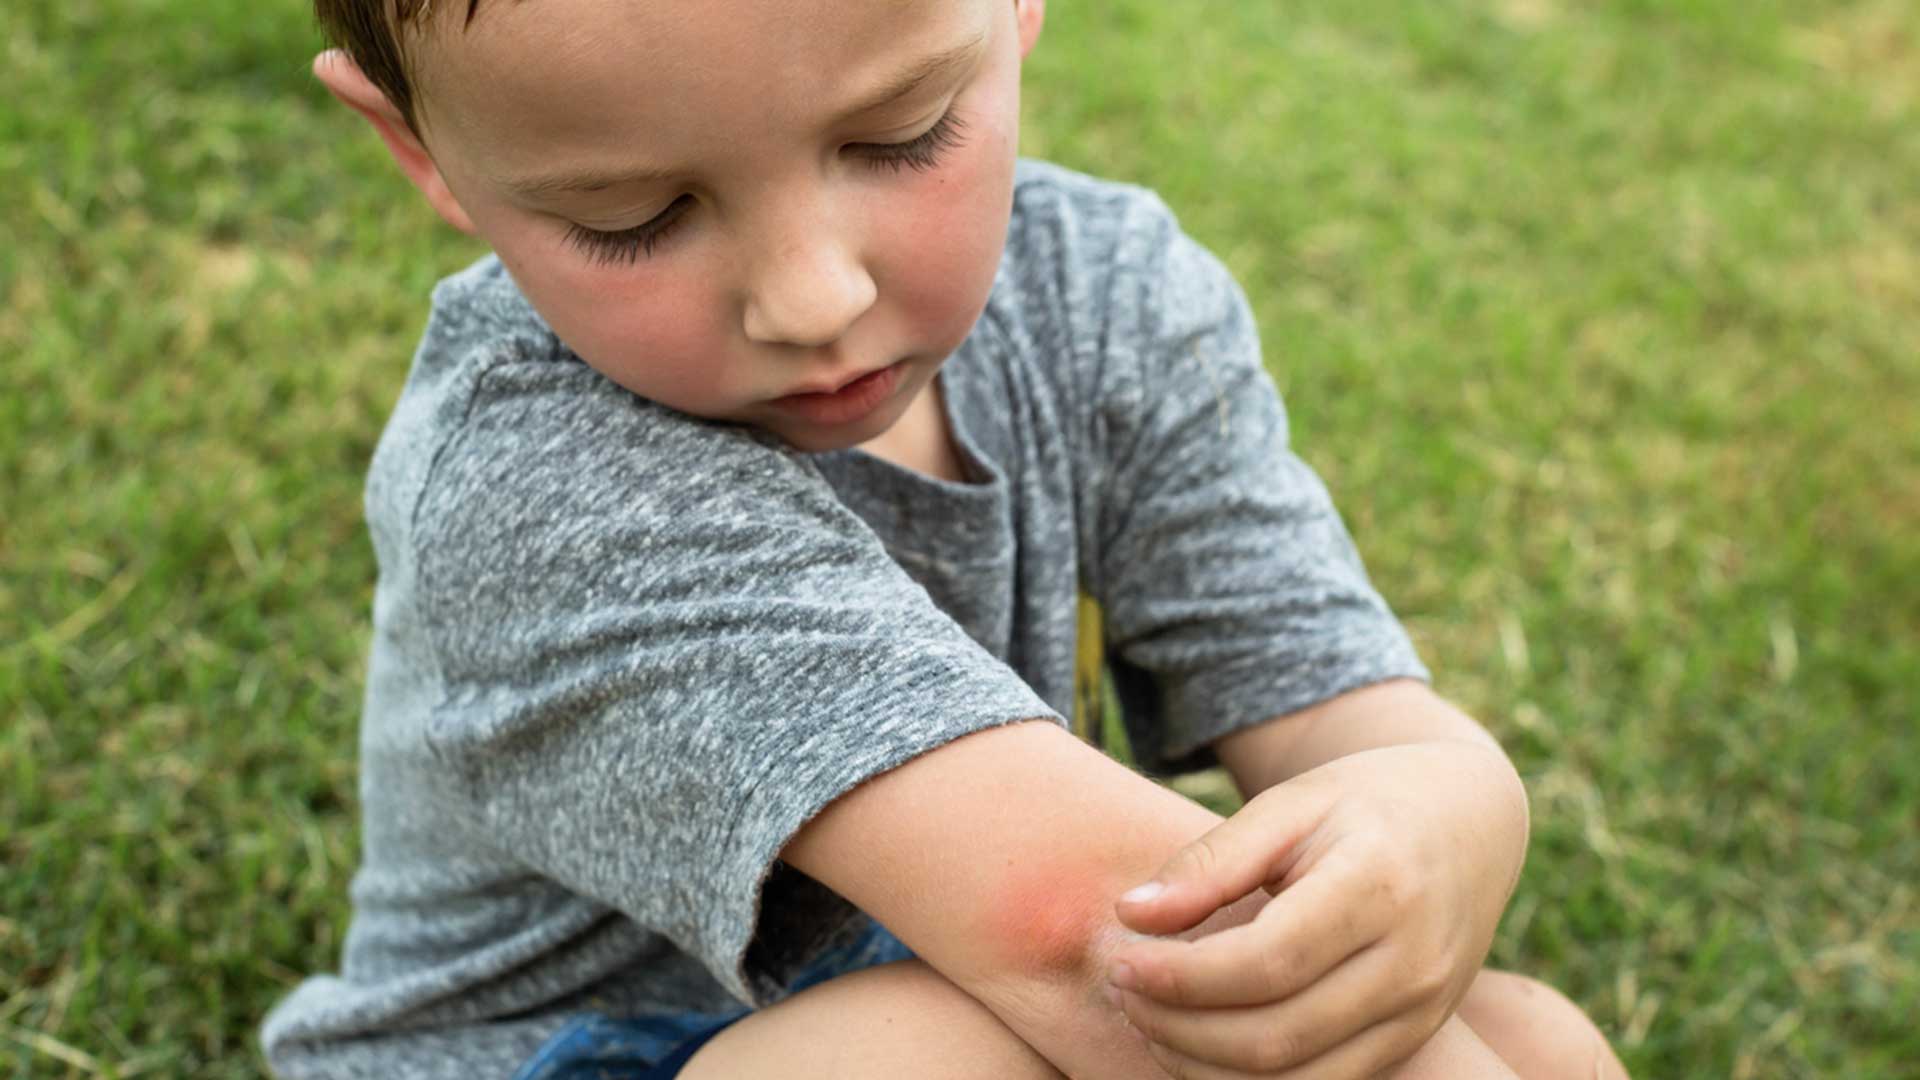 Young child with gnat bites on elbows